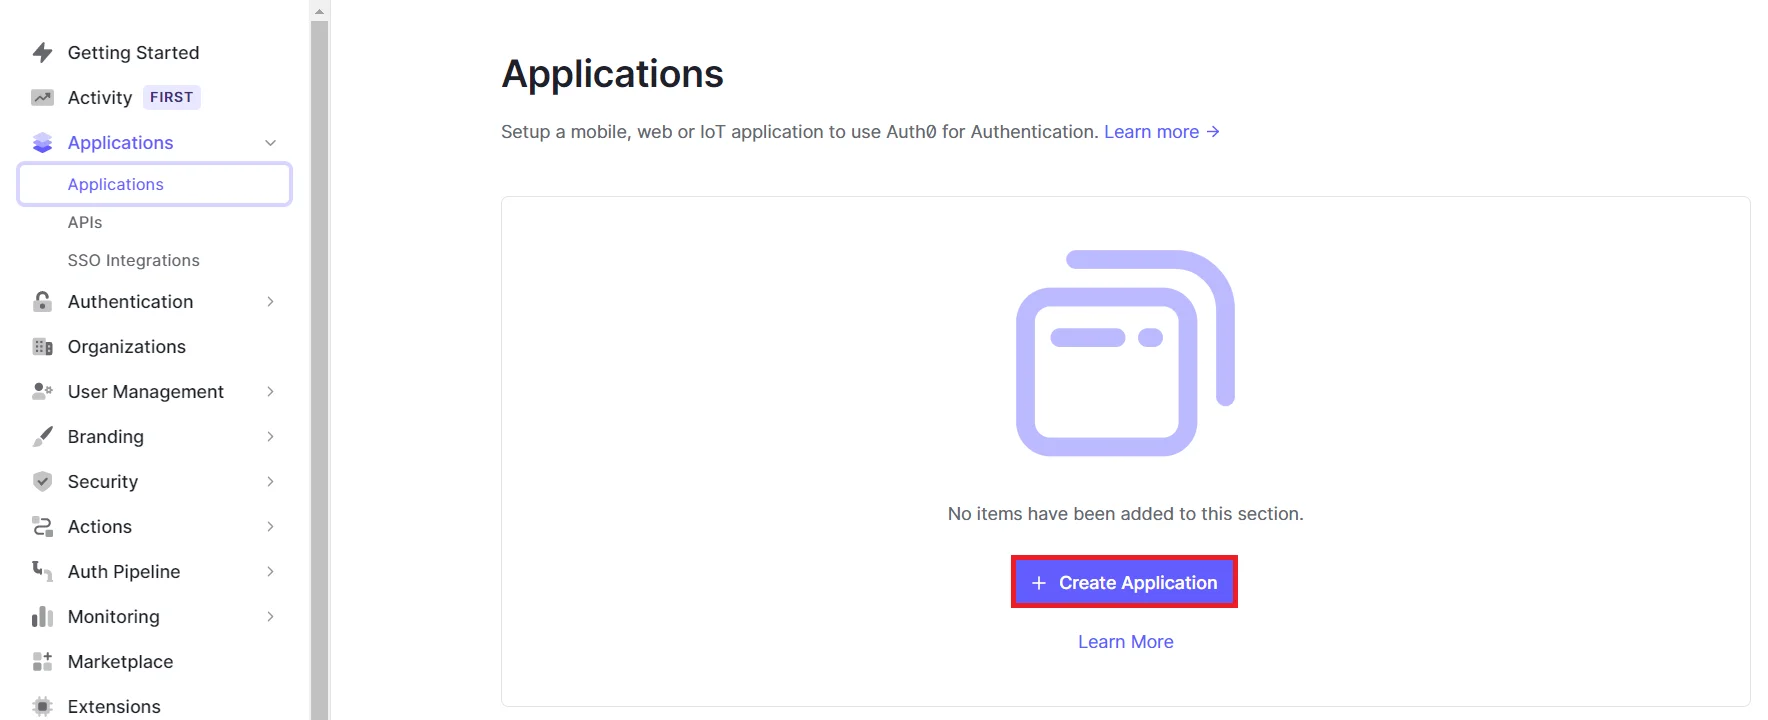 nopCommerce OAuth Single Sign-On (SSO) using Auth0 as IDP - create application